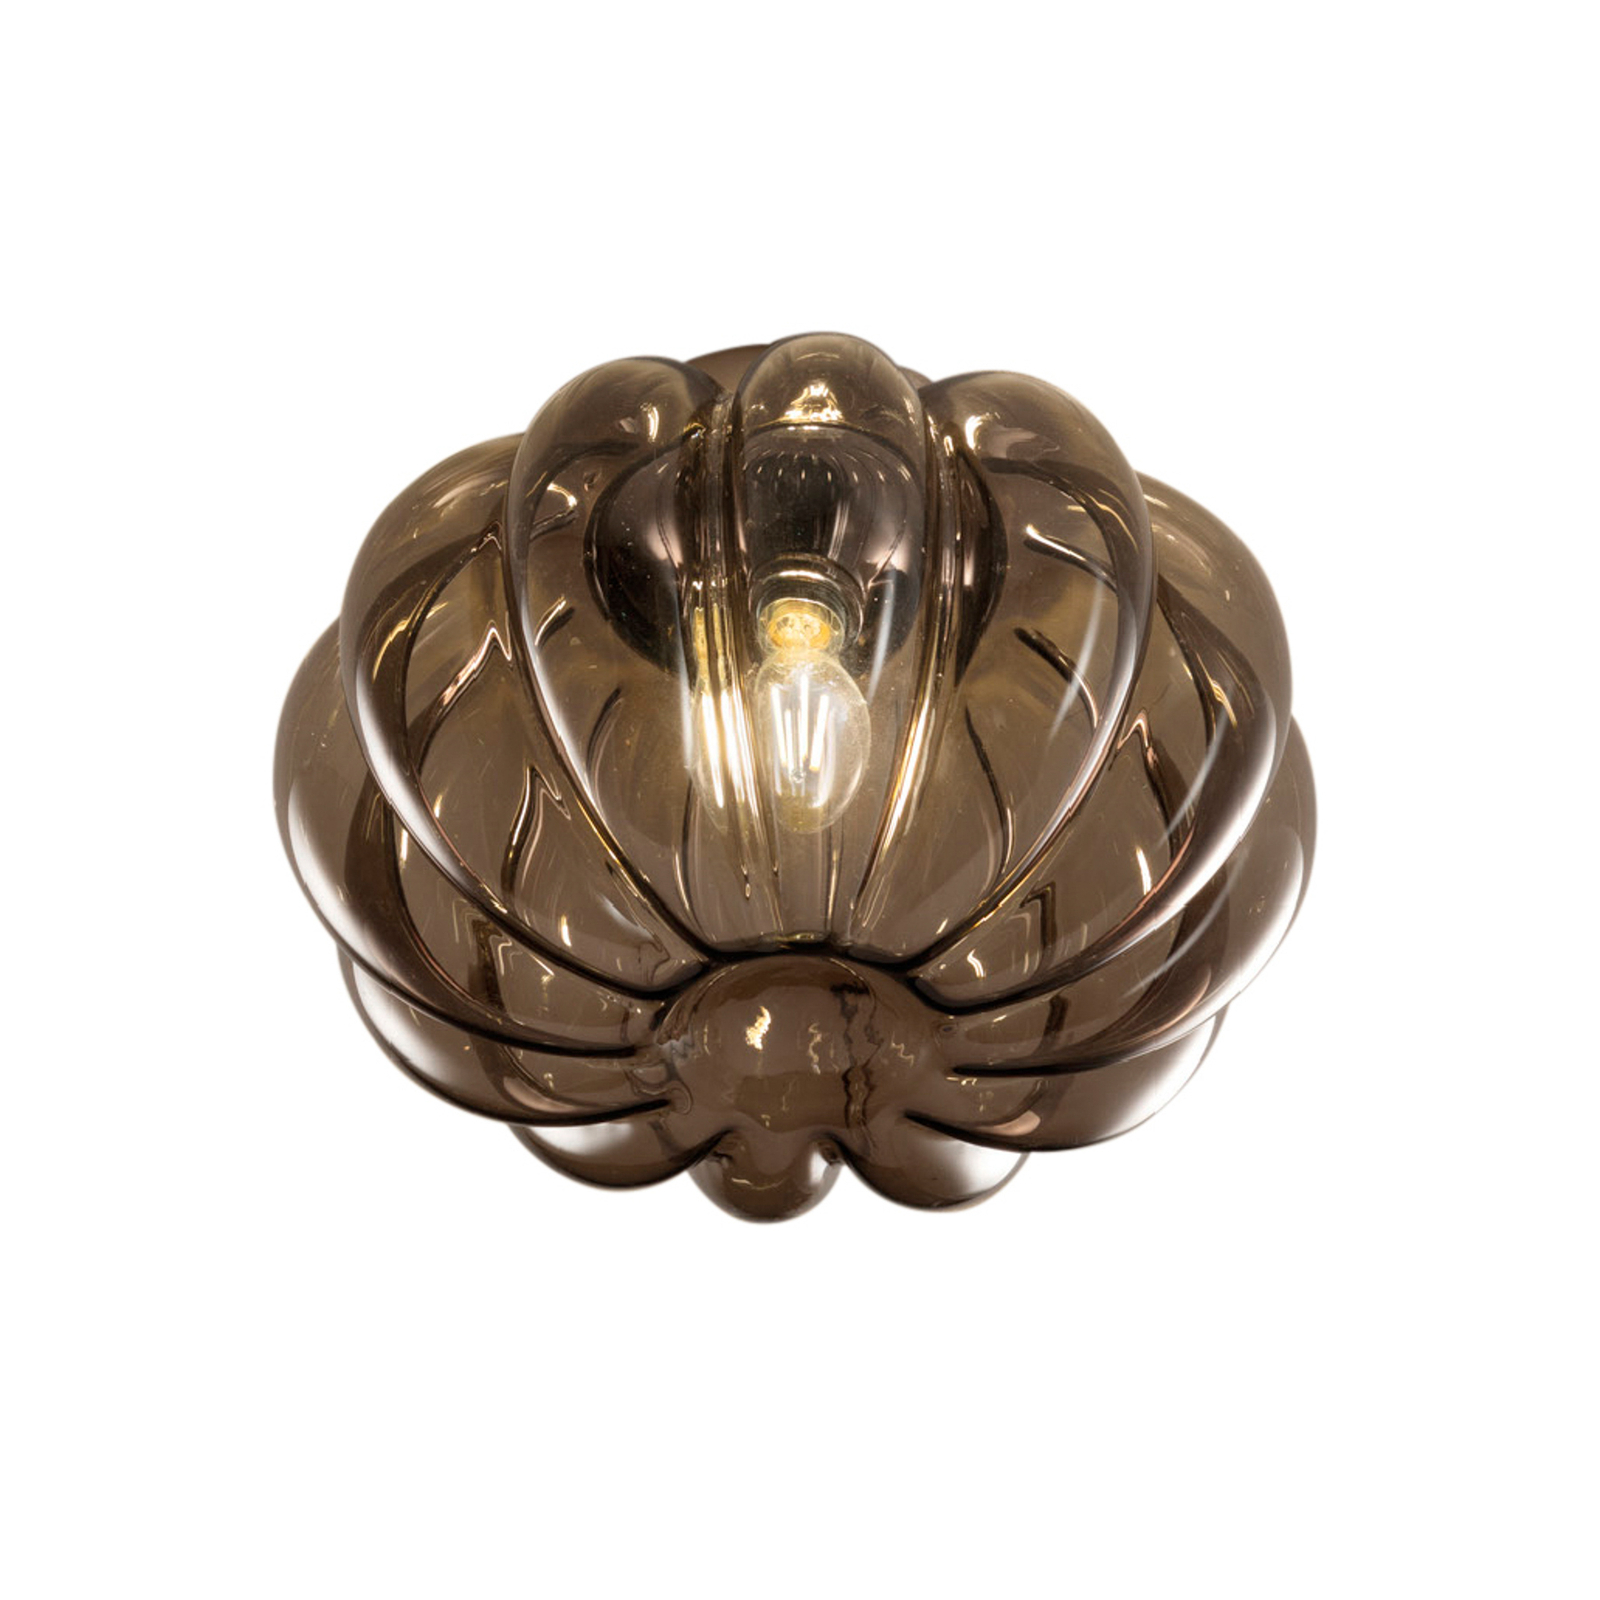 Sugar ceiling light with glass shade, smoked